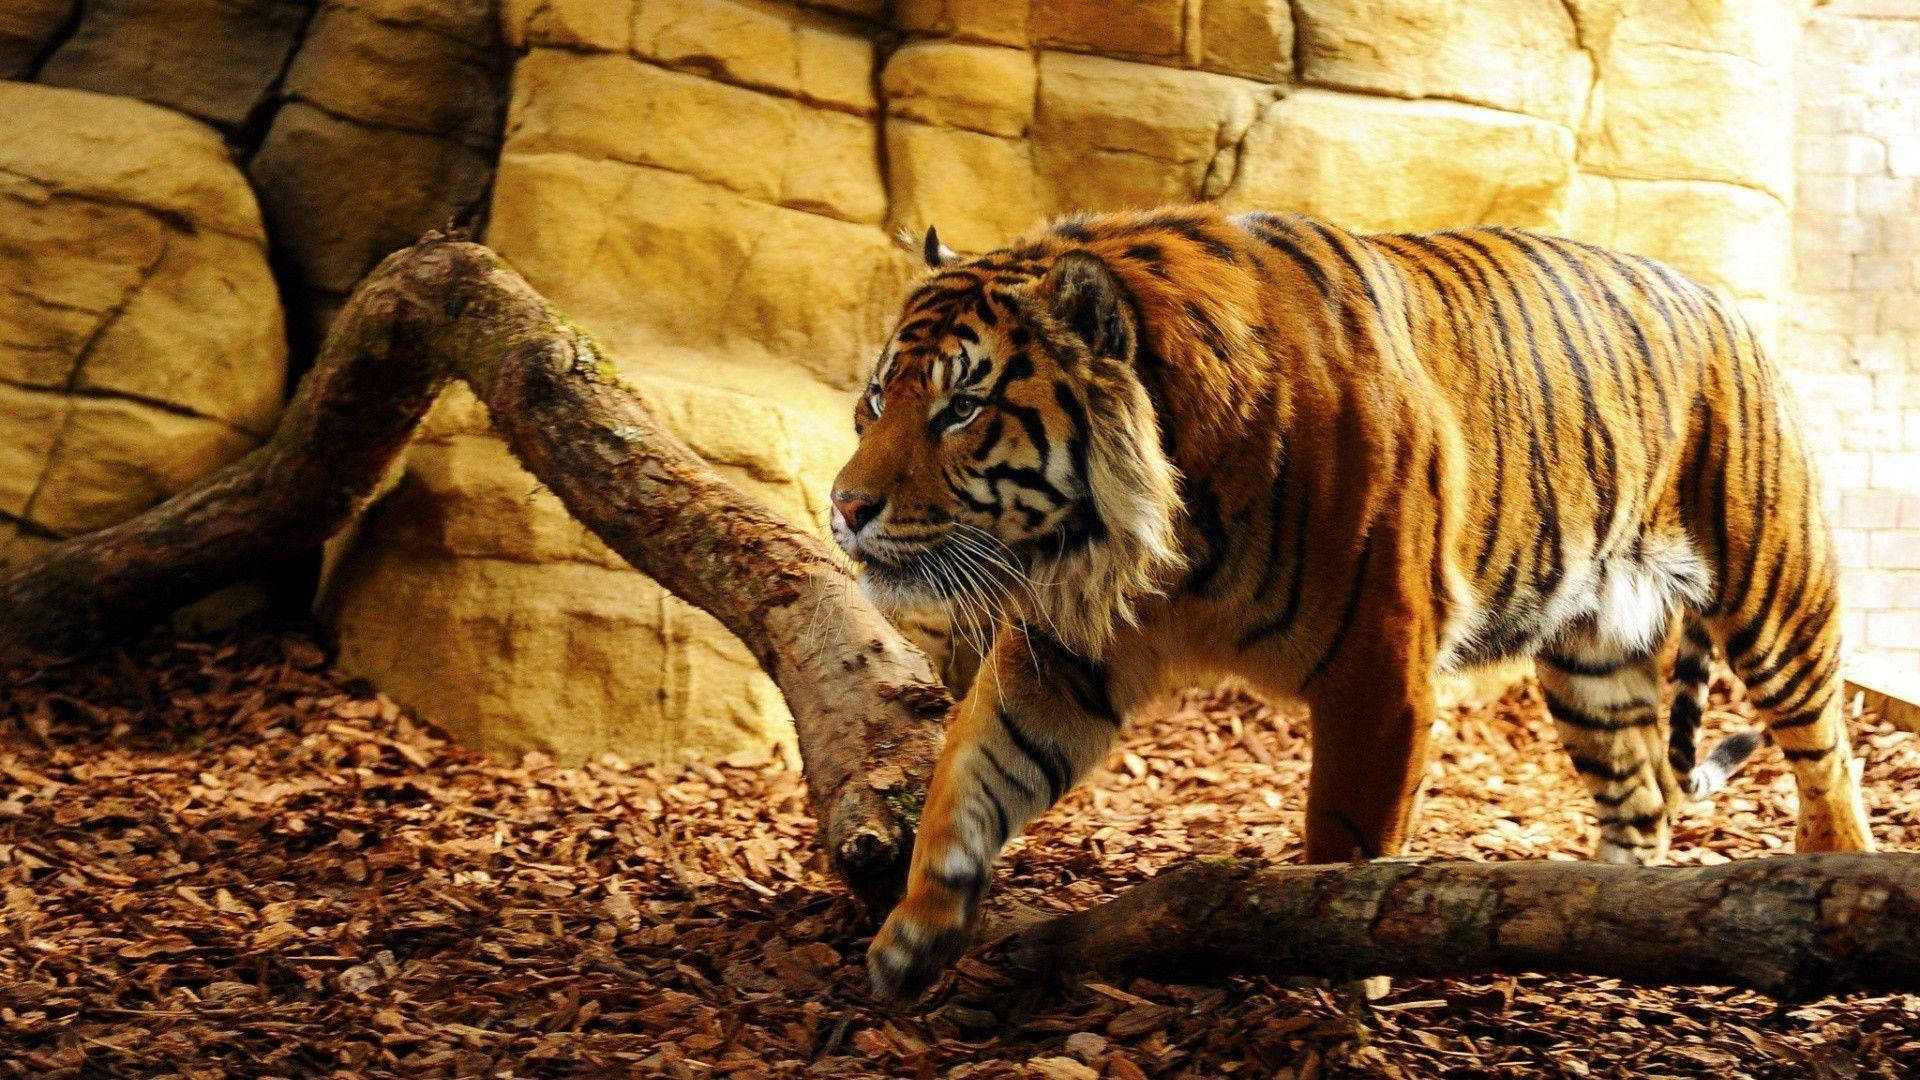 "An Encounter With Nature's Dangerous Big Cat: The Tiger" Wallpaper